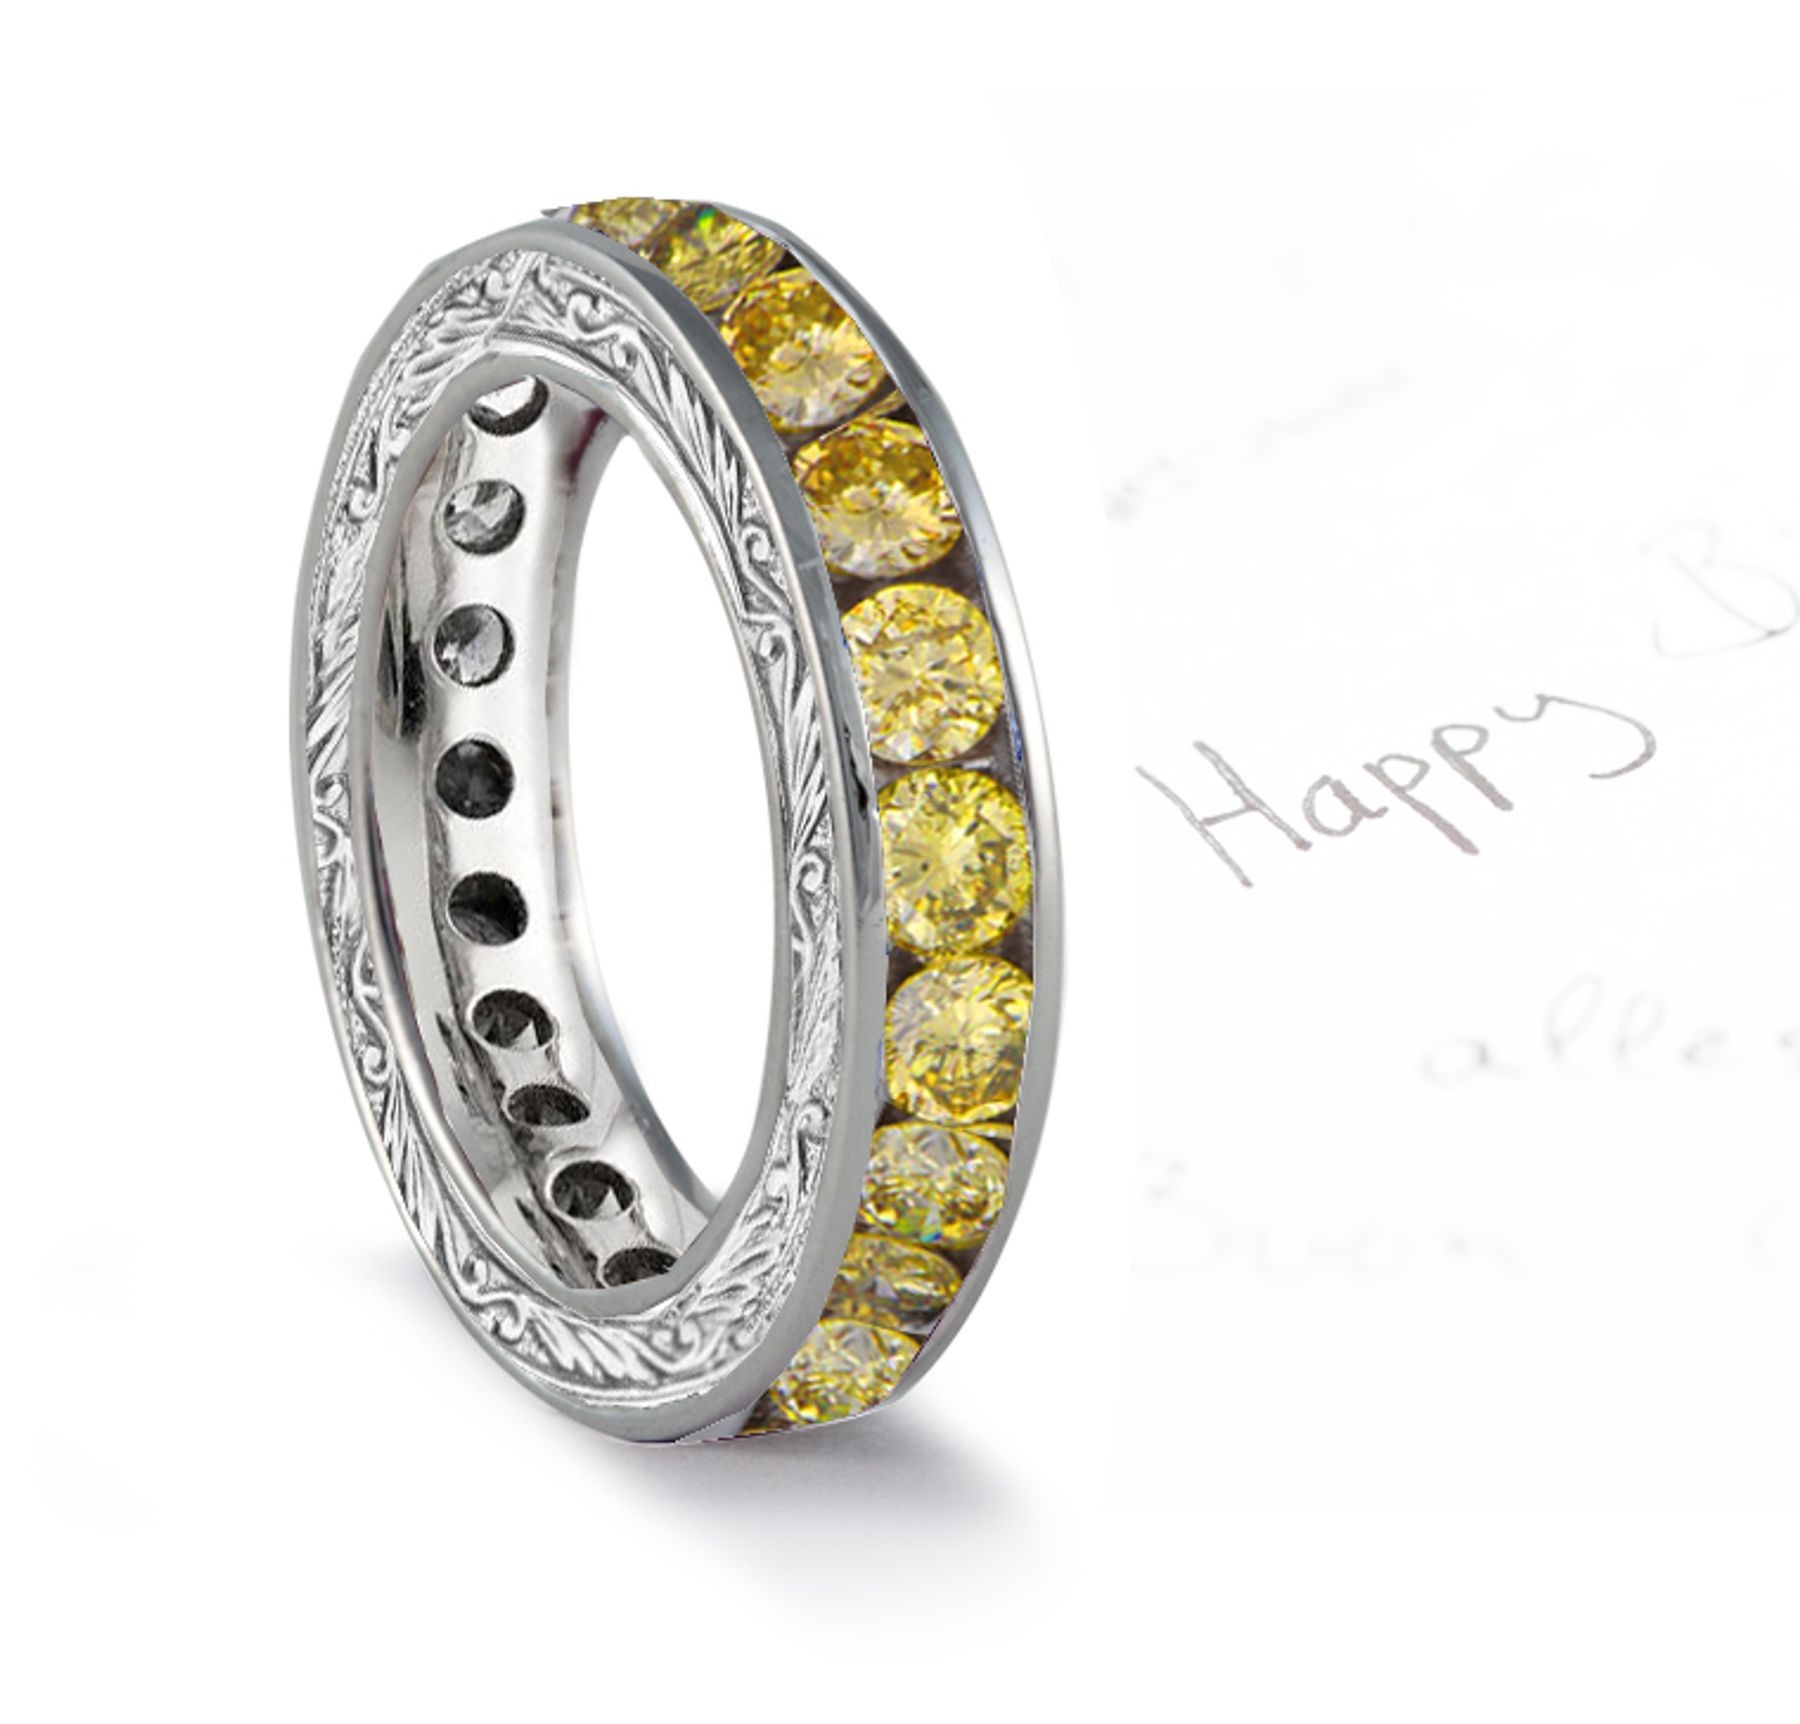 Antique Style Yellow Diamond Band Sides Profusely Engraved with Scroll, Floral & Leaf Motifs